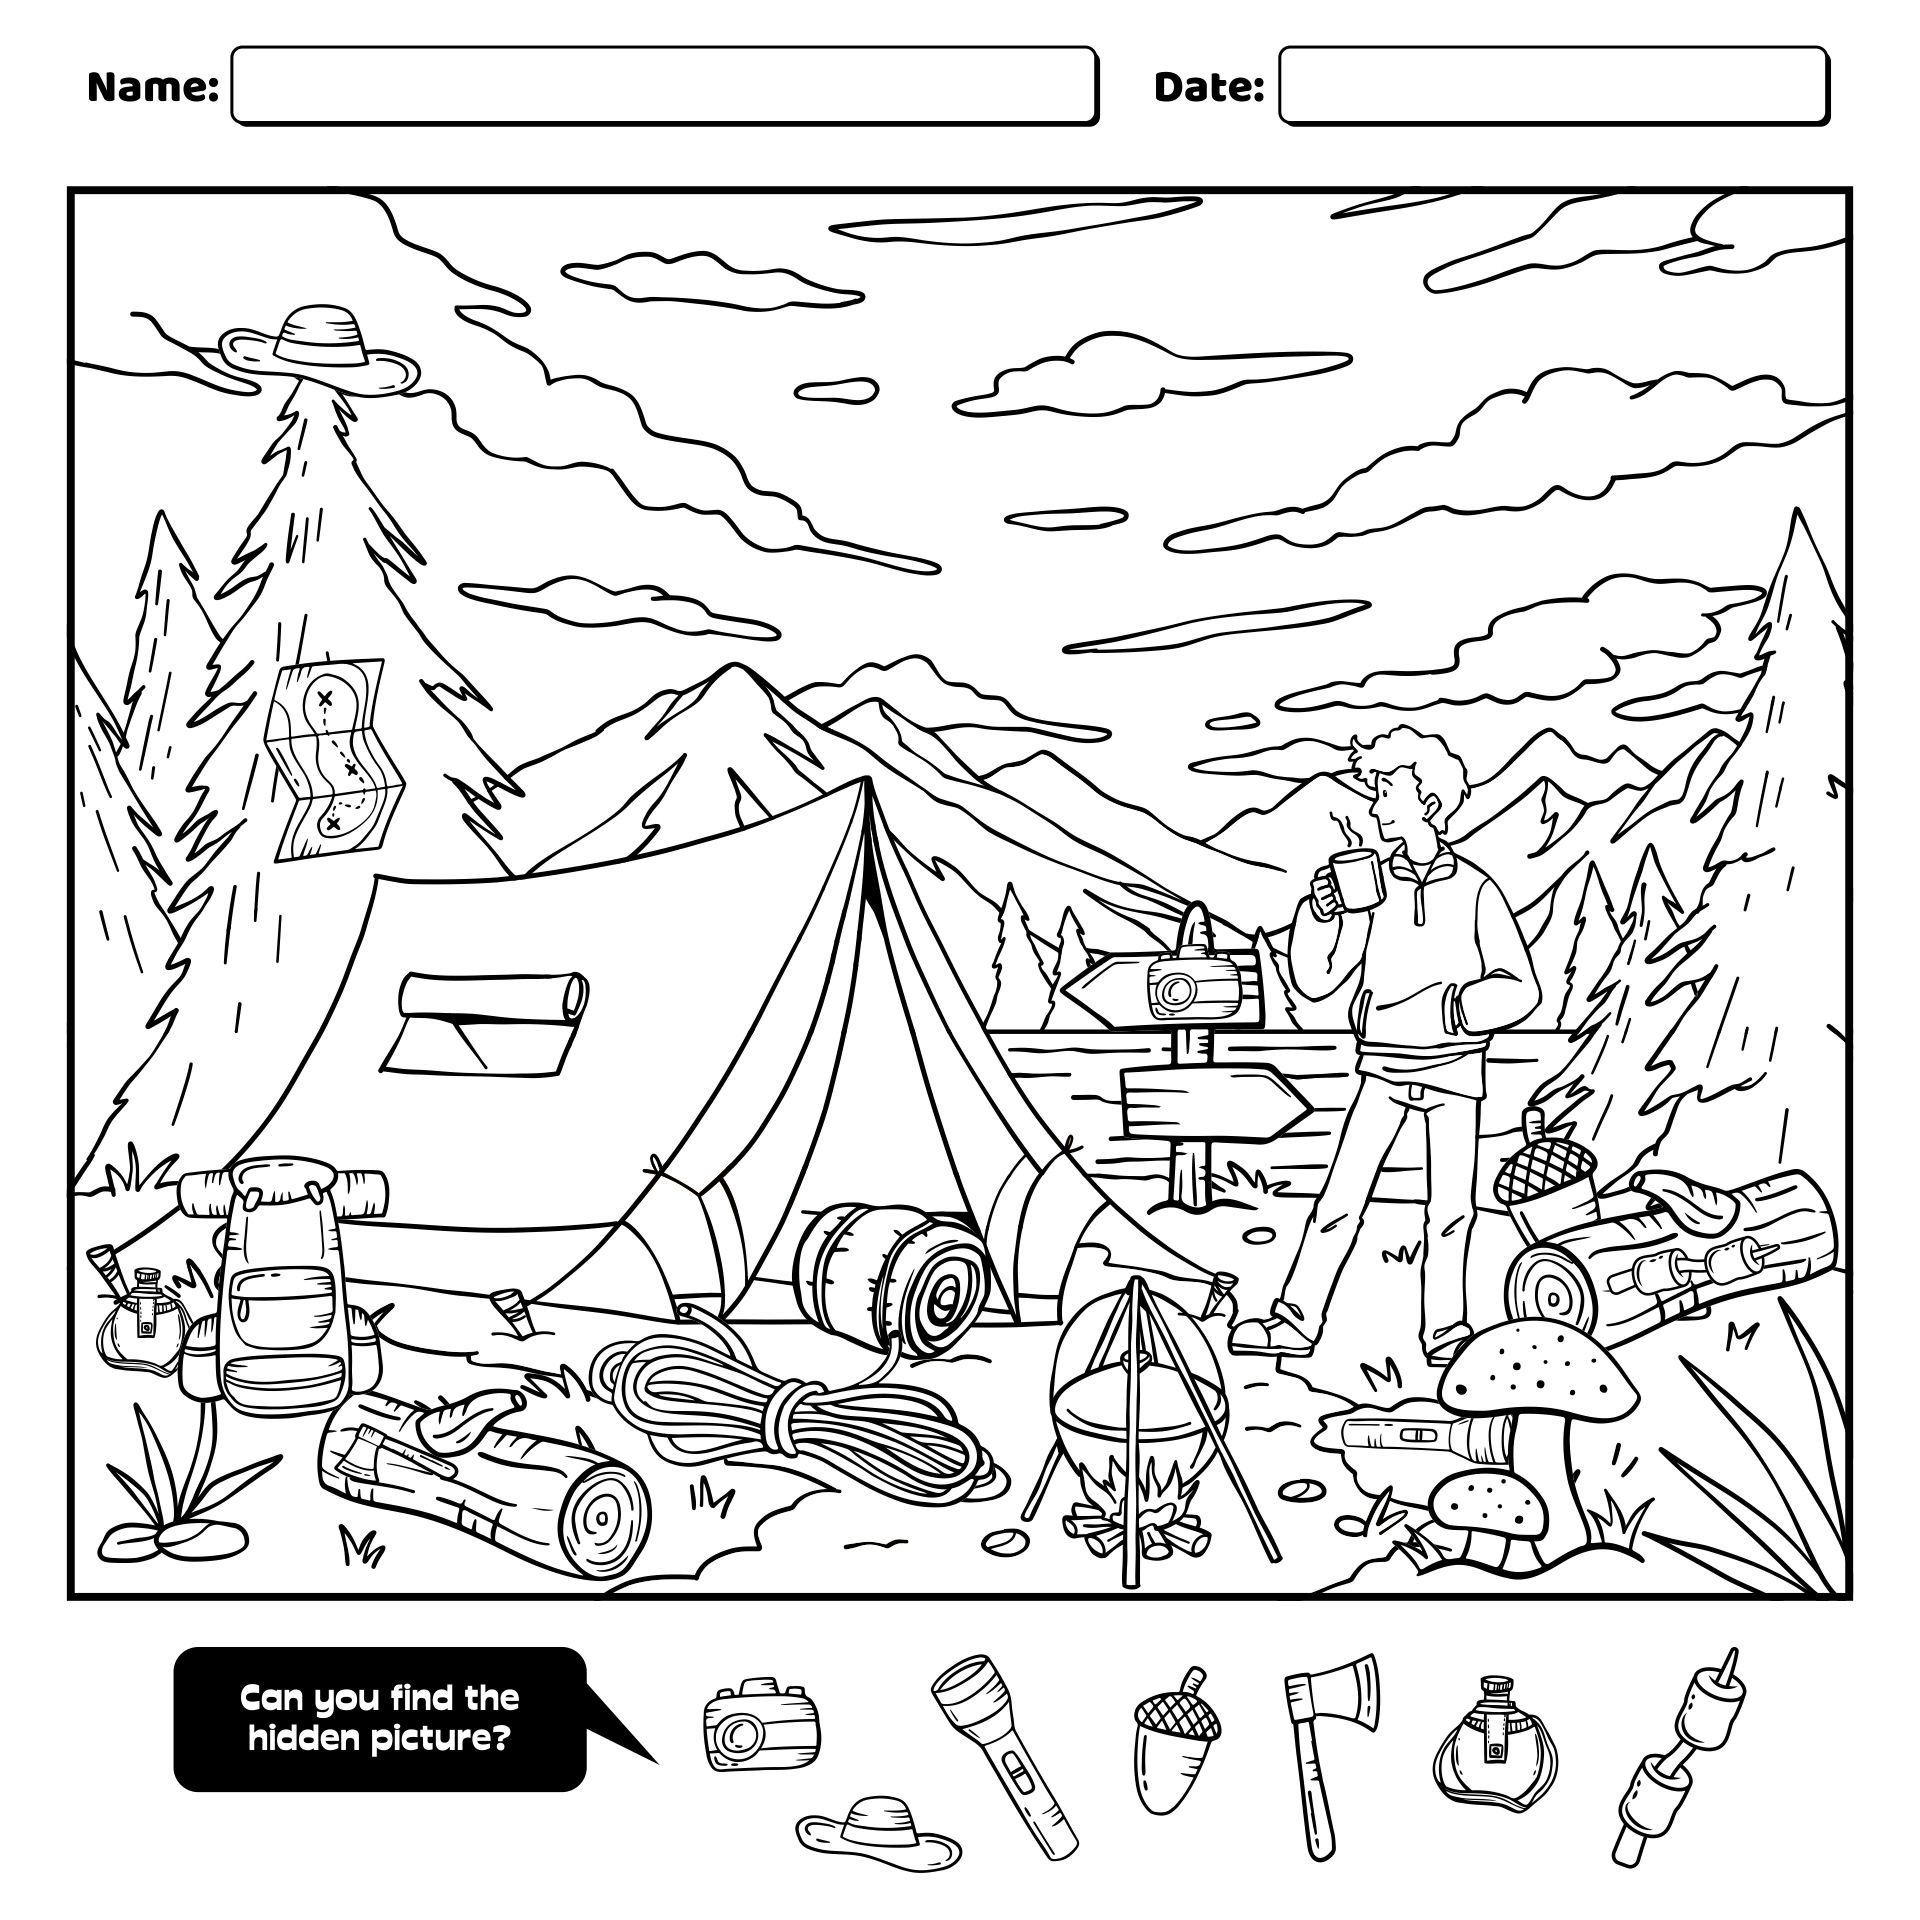 Printable Hidden Object Puzzle Games Find+Hidden+Objects+Puzzles